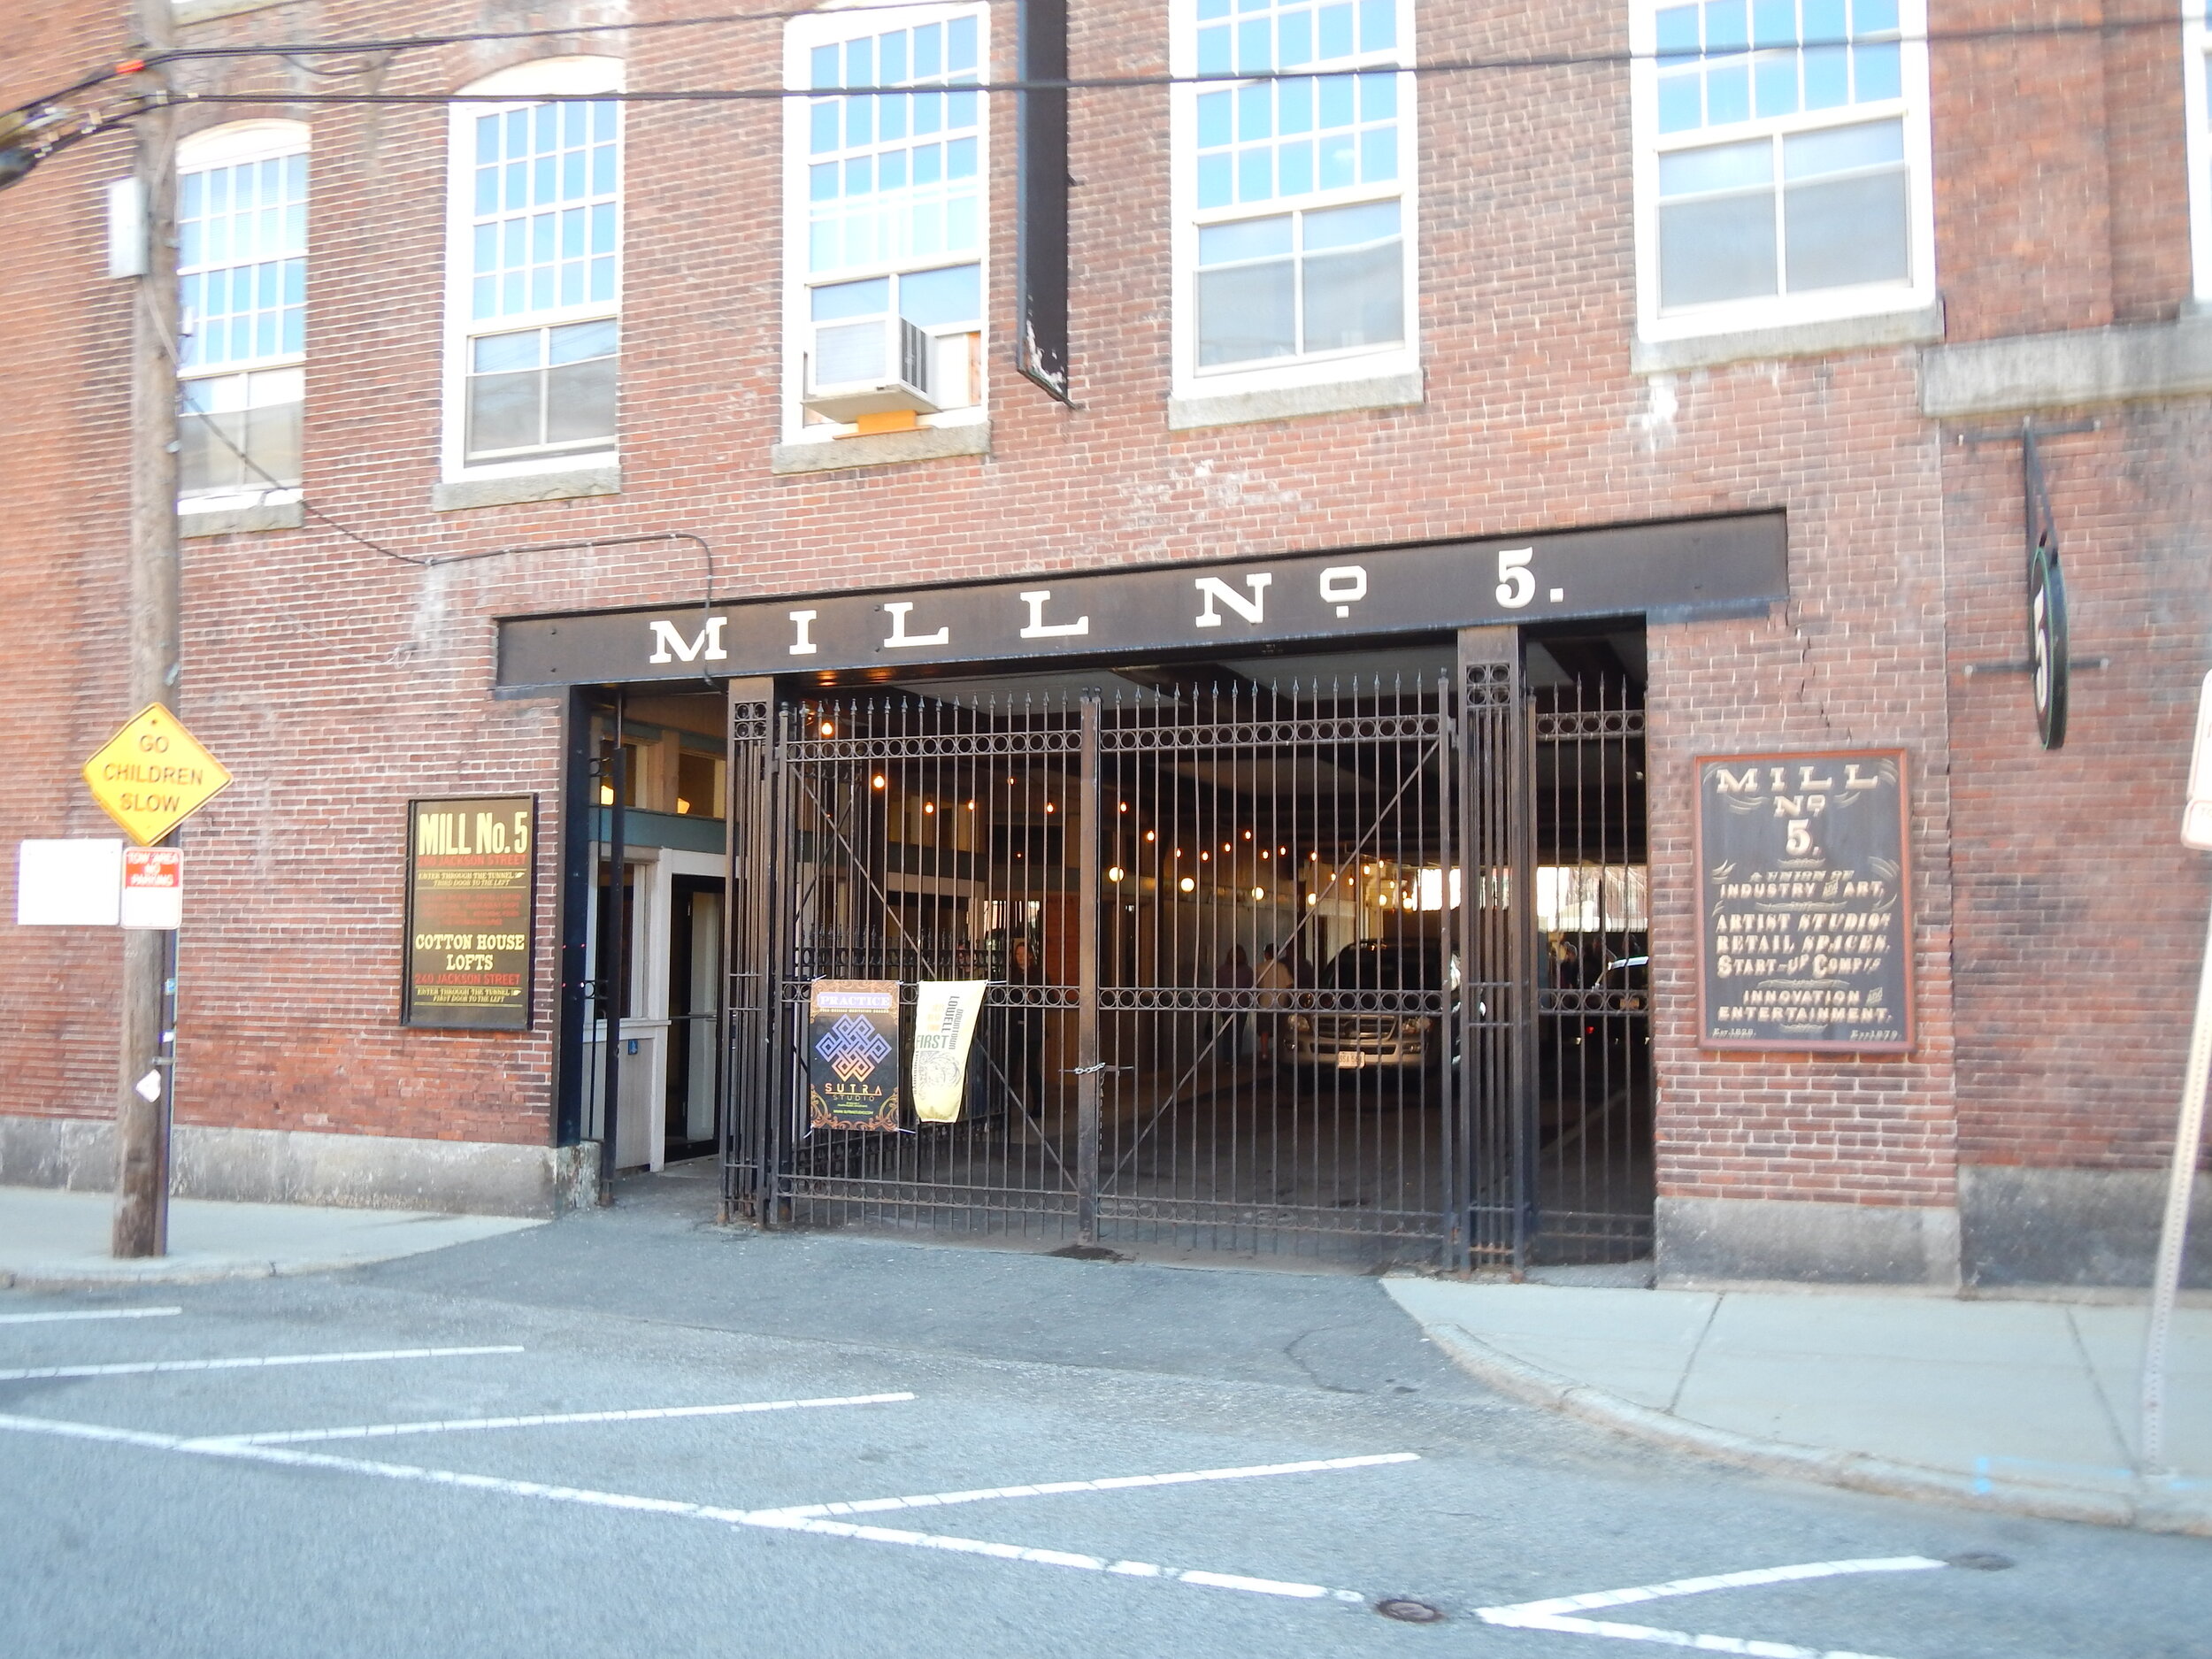 Mill Building, Lowell